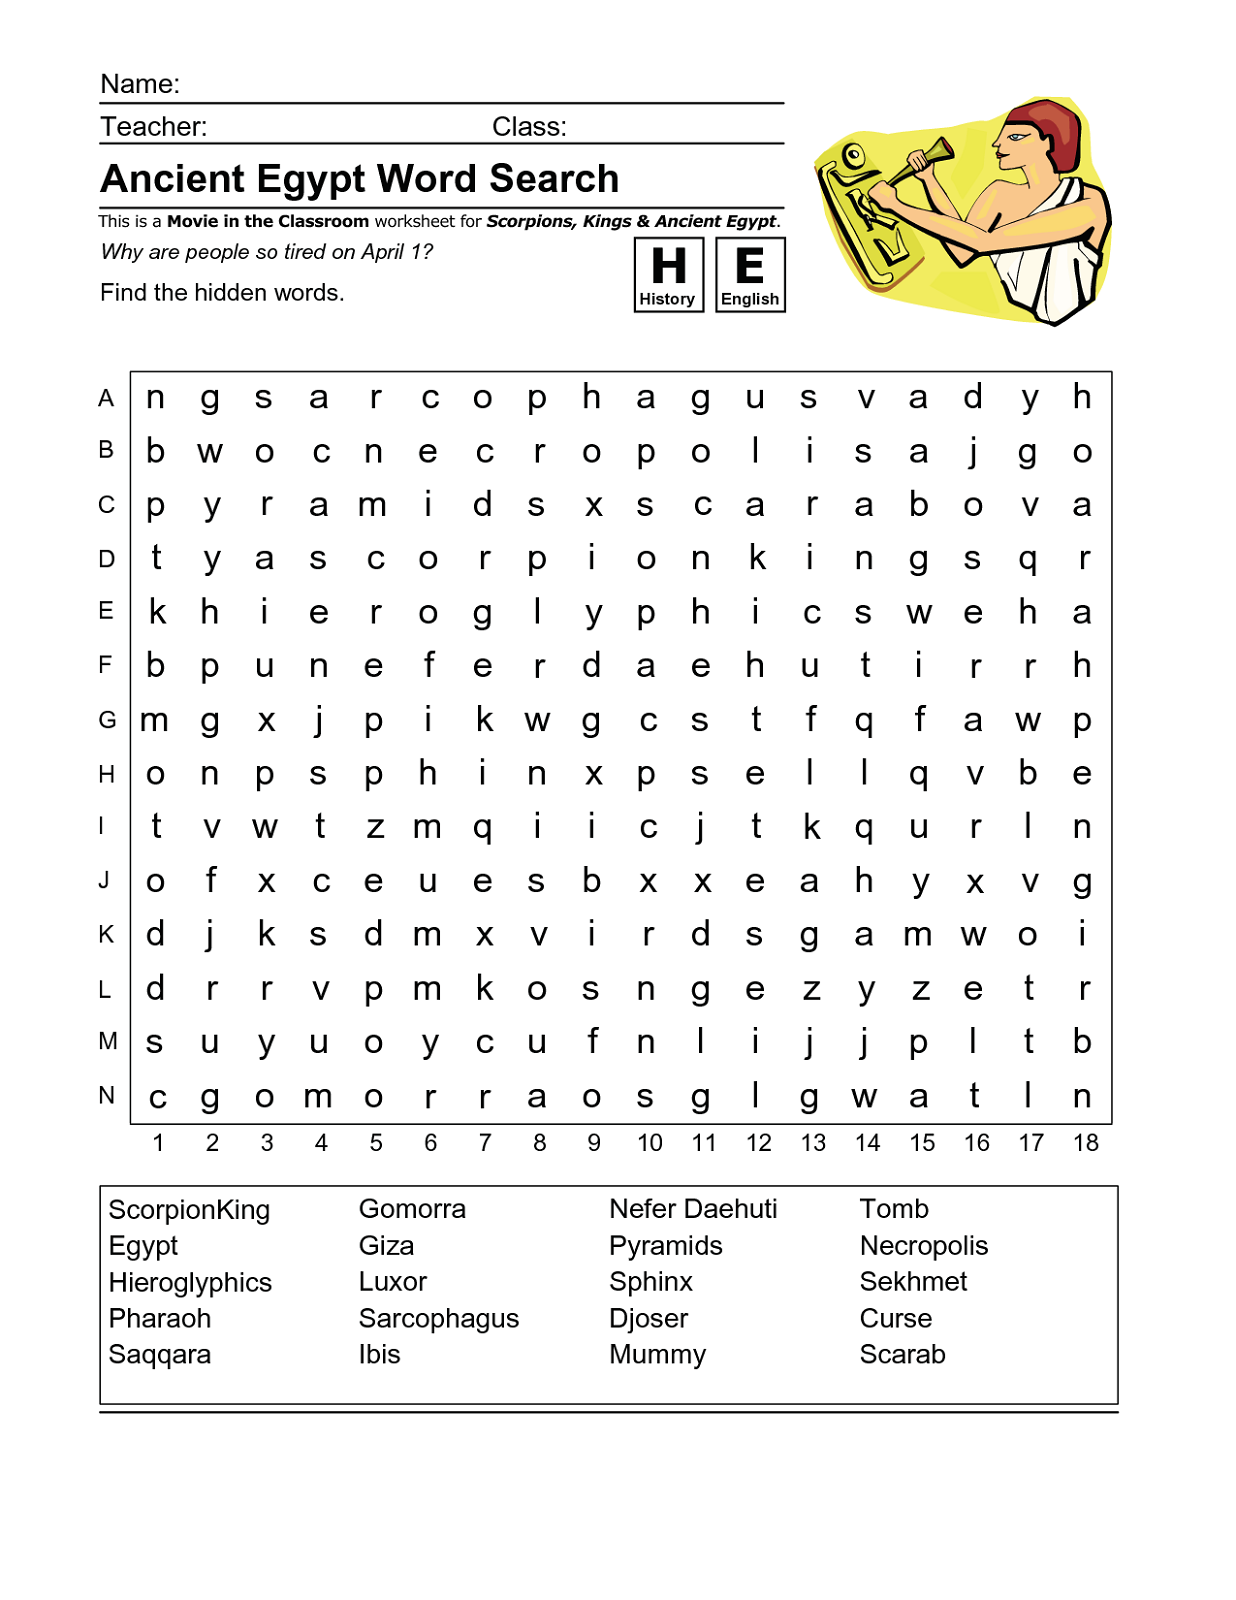 movie-word-search-new